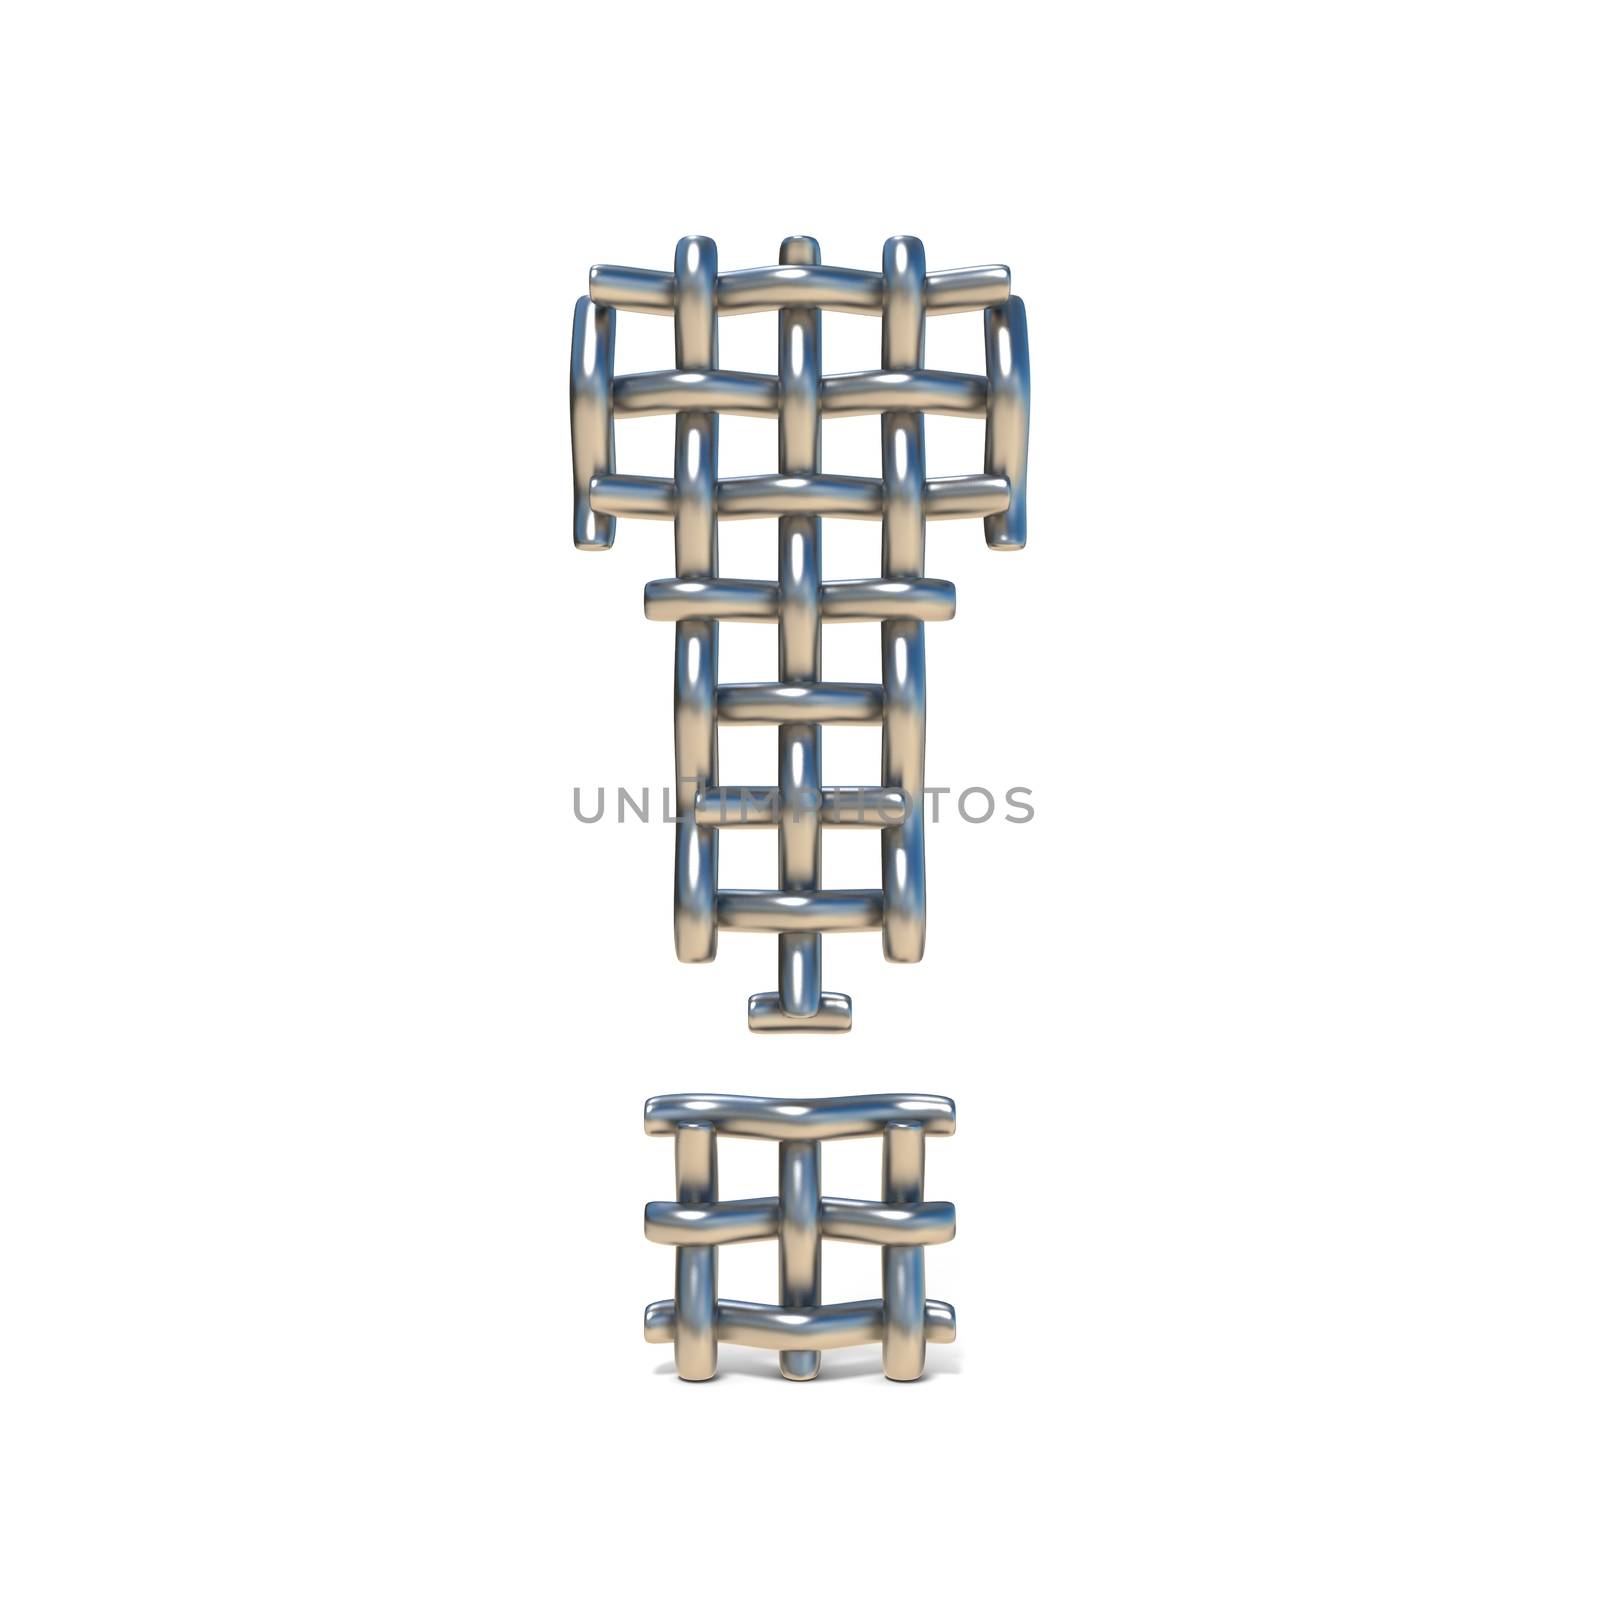 Metal wire mesh font EXCLAMATION MARK 3D render illustration isolated on white background